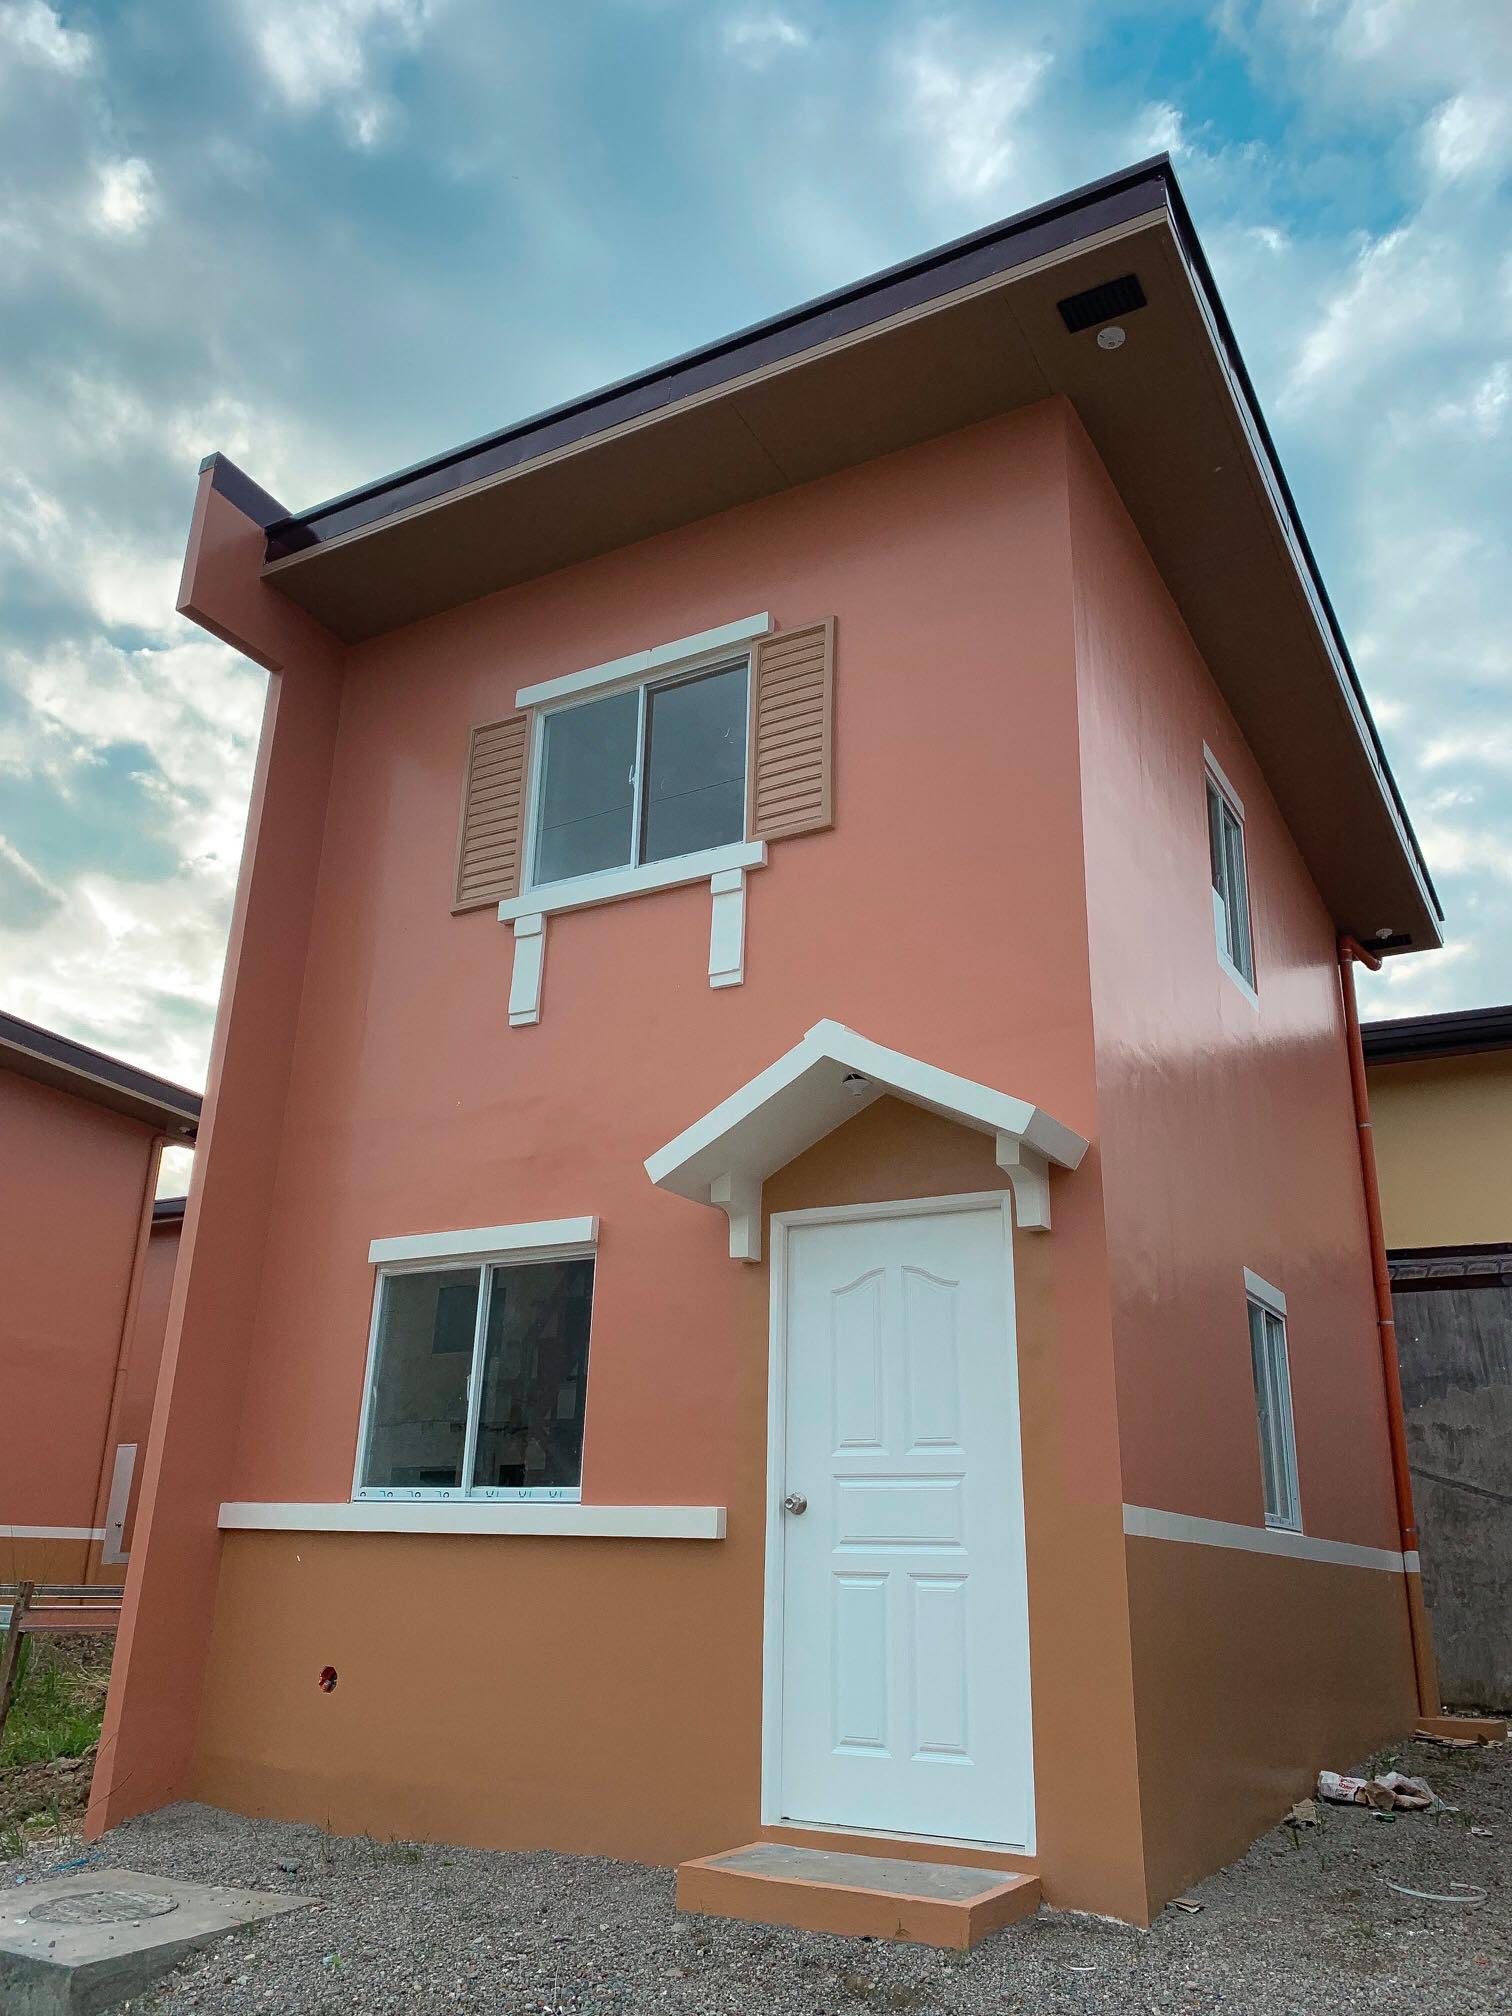 AFFORDABLE HOUSE AND LOT FOR SALE IN SAN JUAN BATANGAS